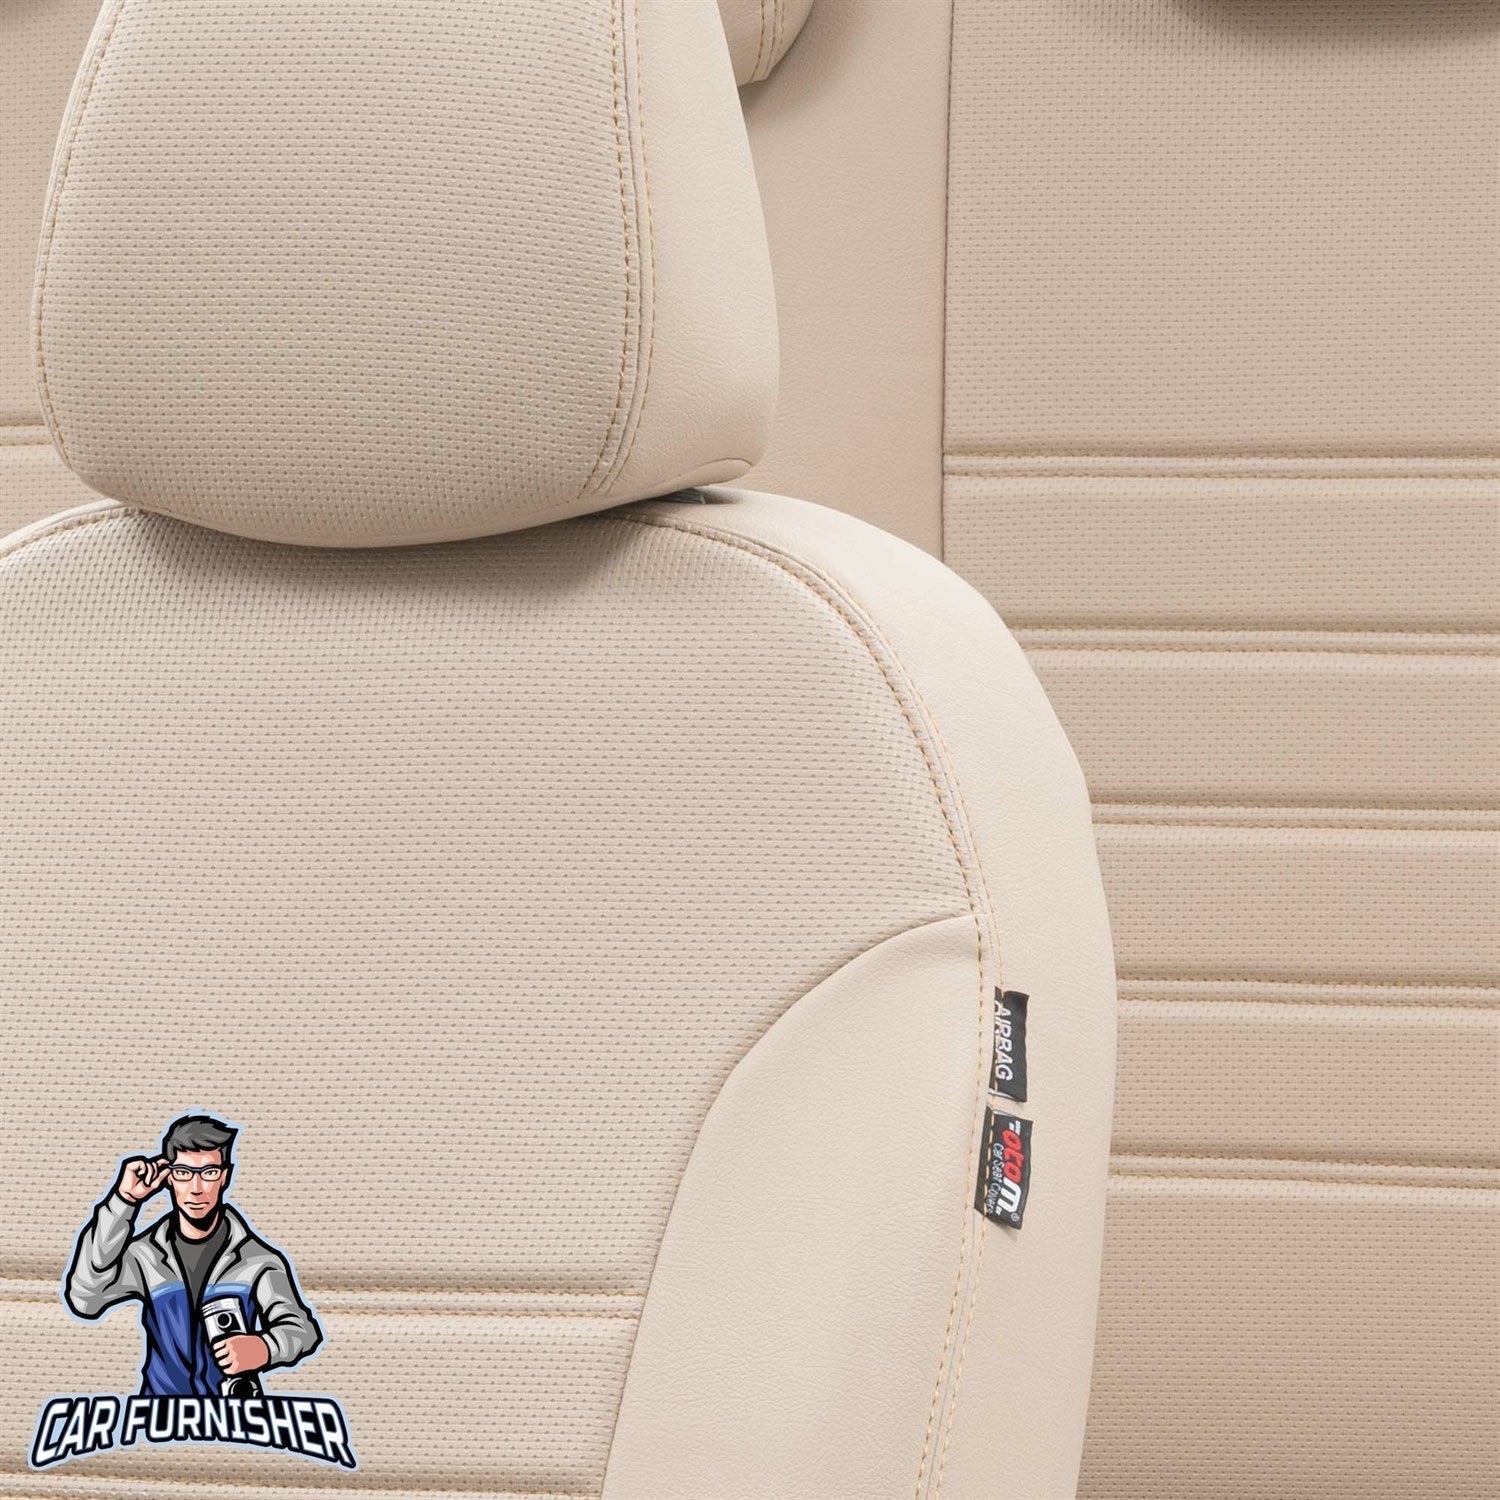 Ford F-Max Seat Cover New York Leather Design Beige Front Seats (2 Seats + Handrest + Headrests) Leather